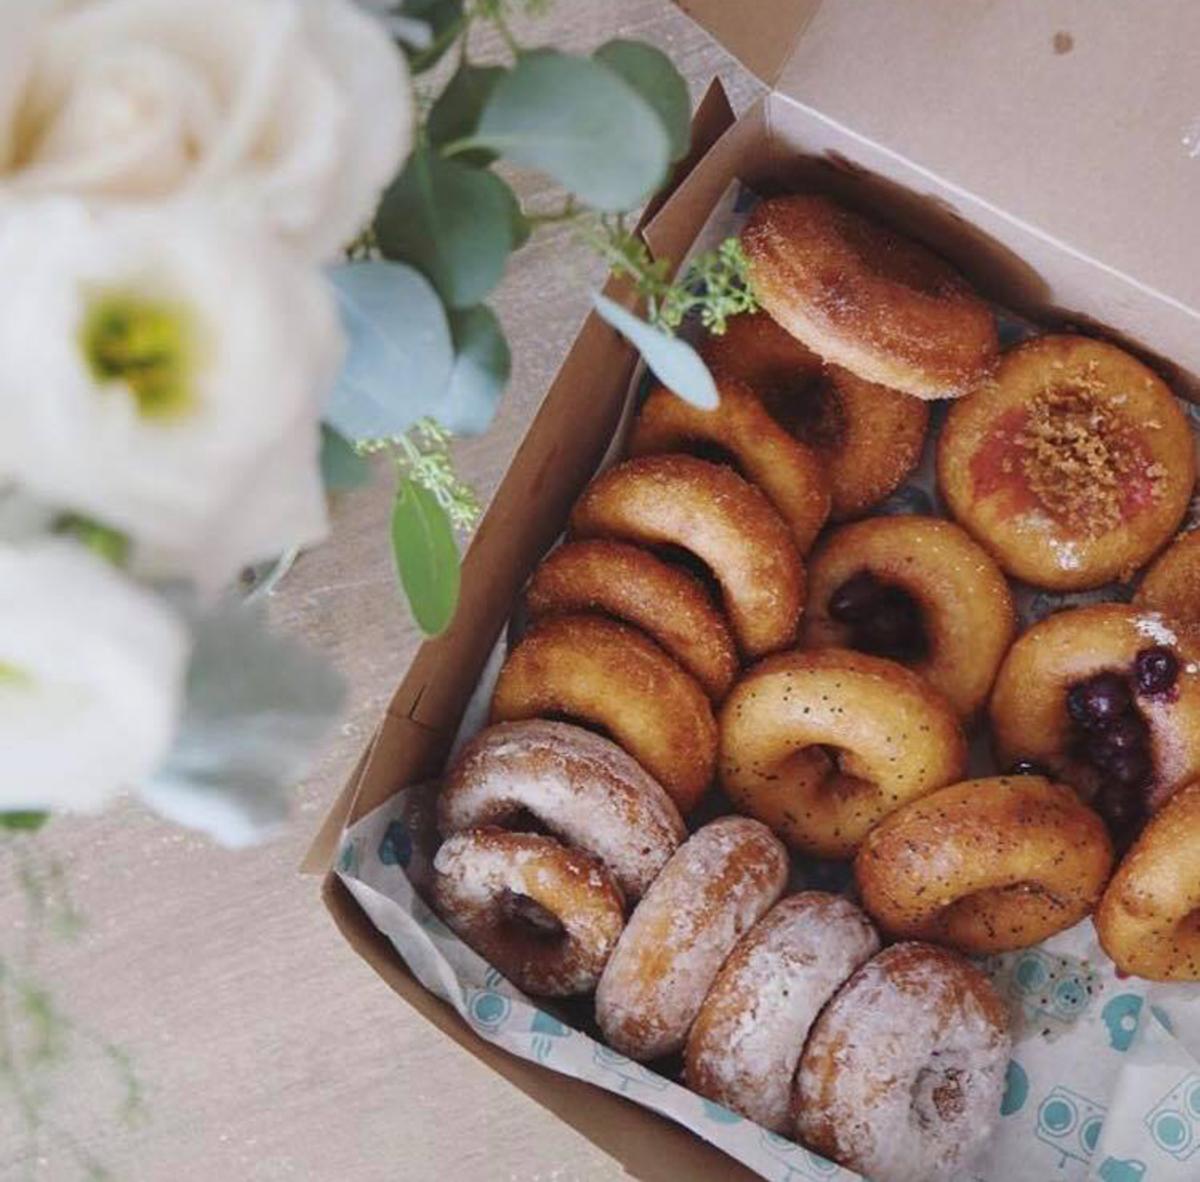 FoCo DoCo donuts and flowers